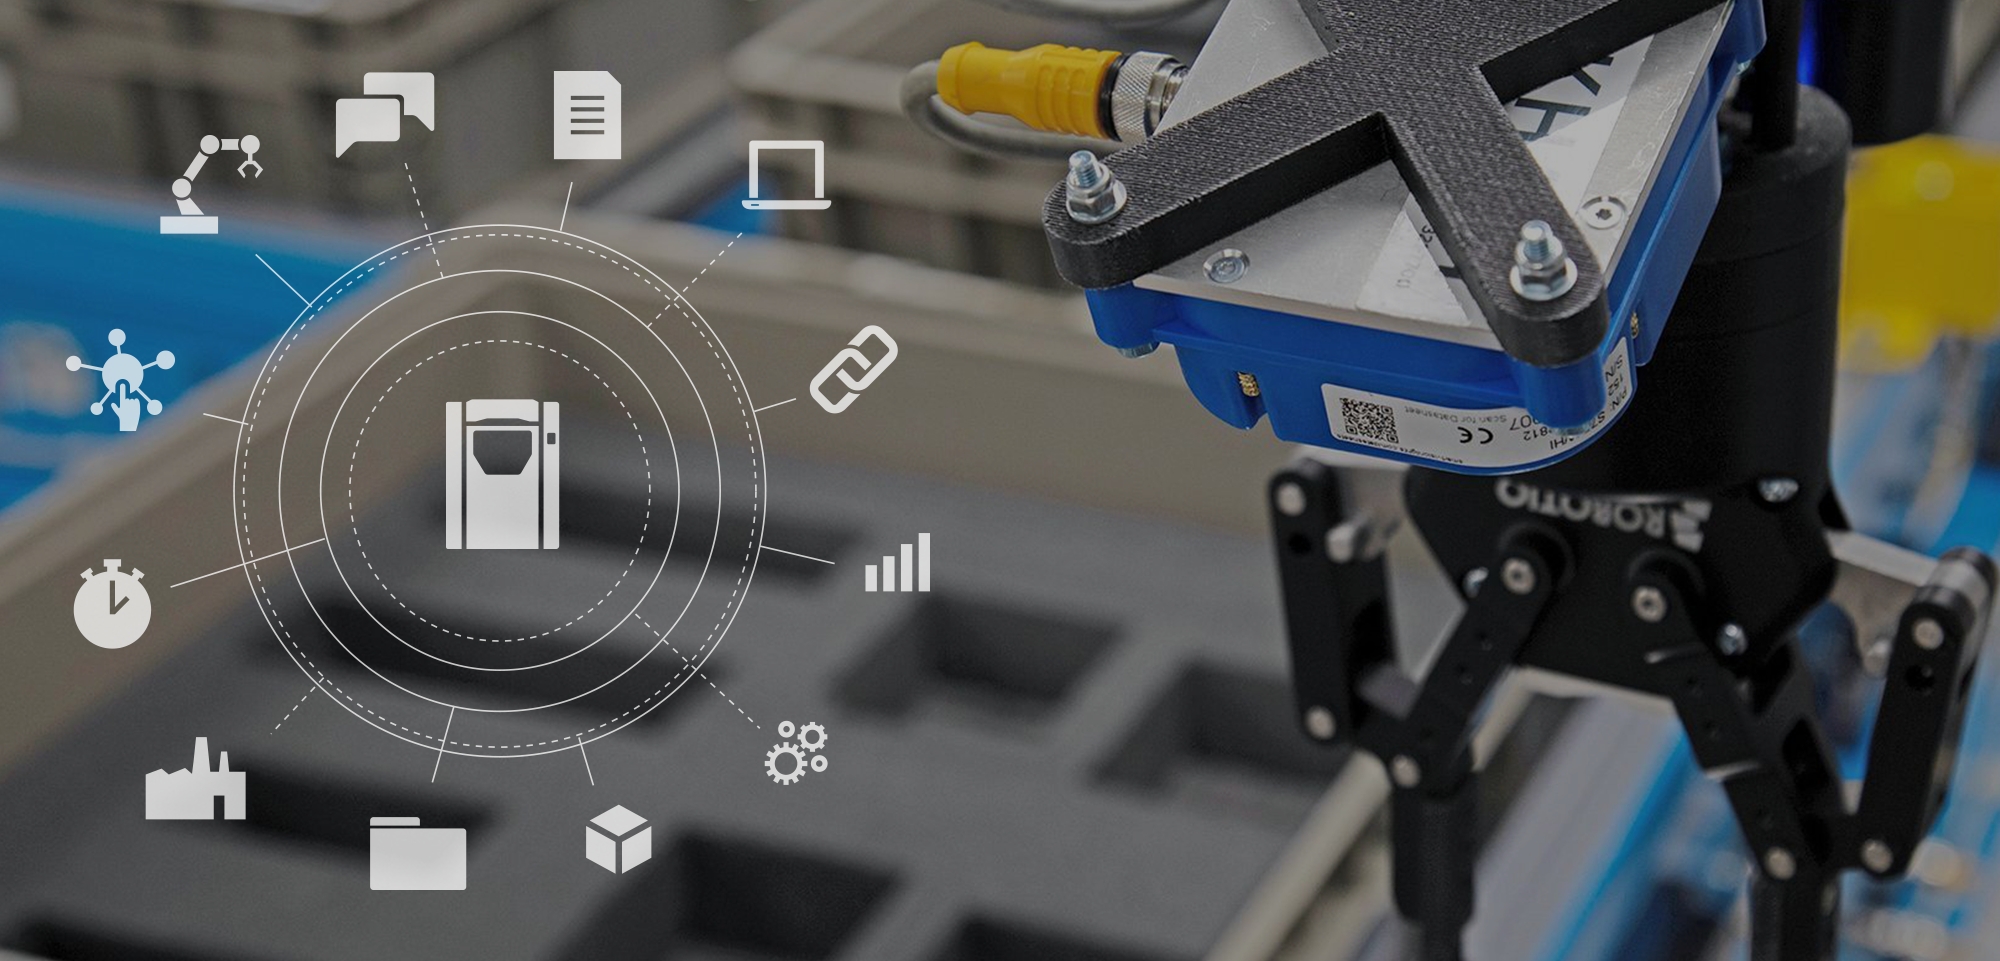 Stratasys has launched its GrabCAD software Development Kit to meet the need of manufacturers increasingly looking to scale up 3D printing for production parts. Image via Business Wire/Stratasys.